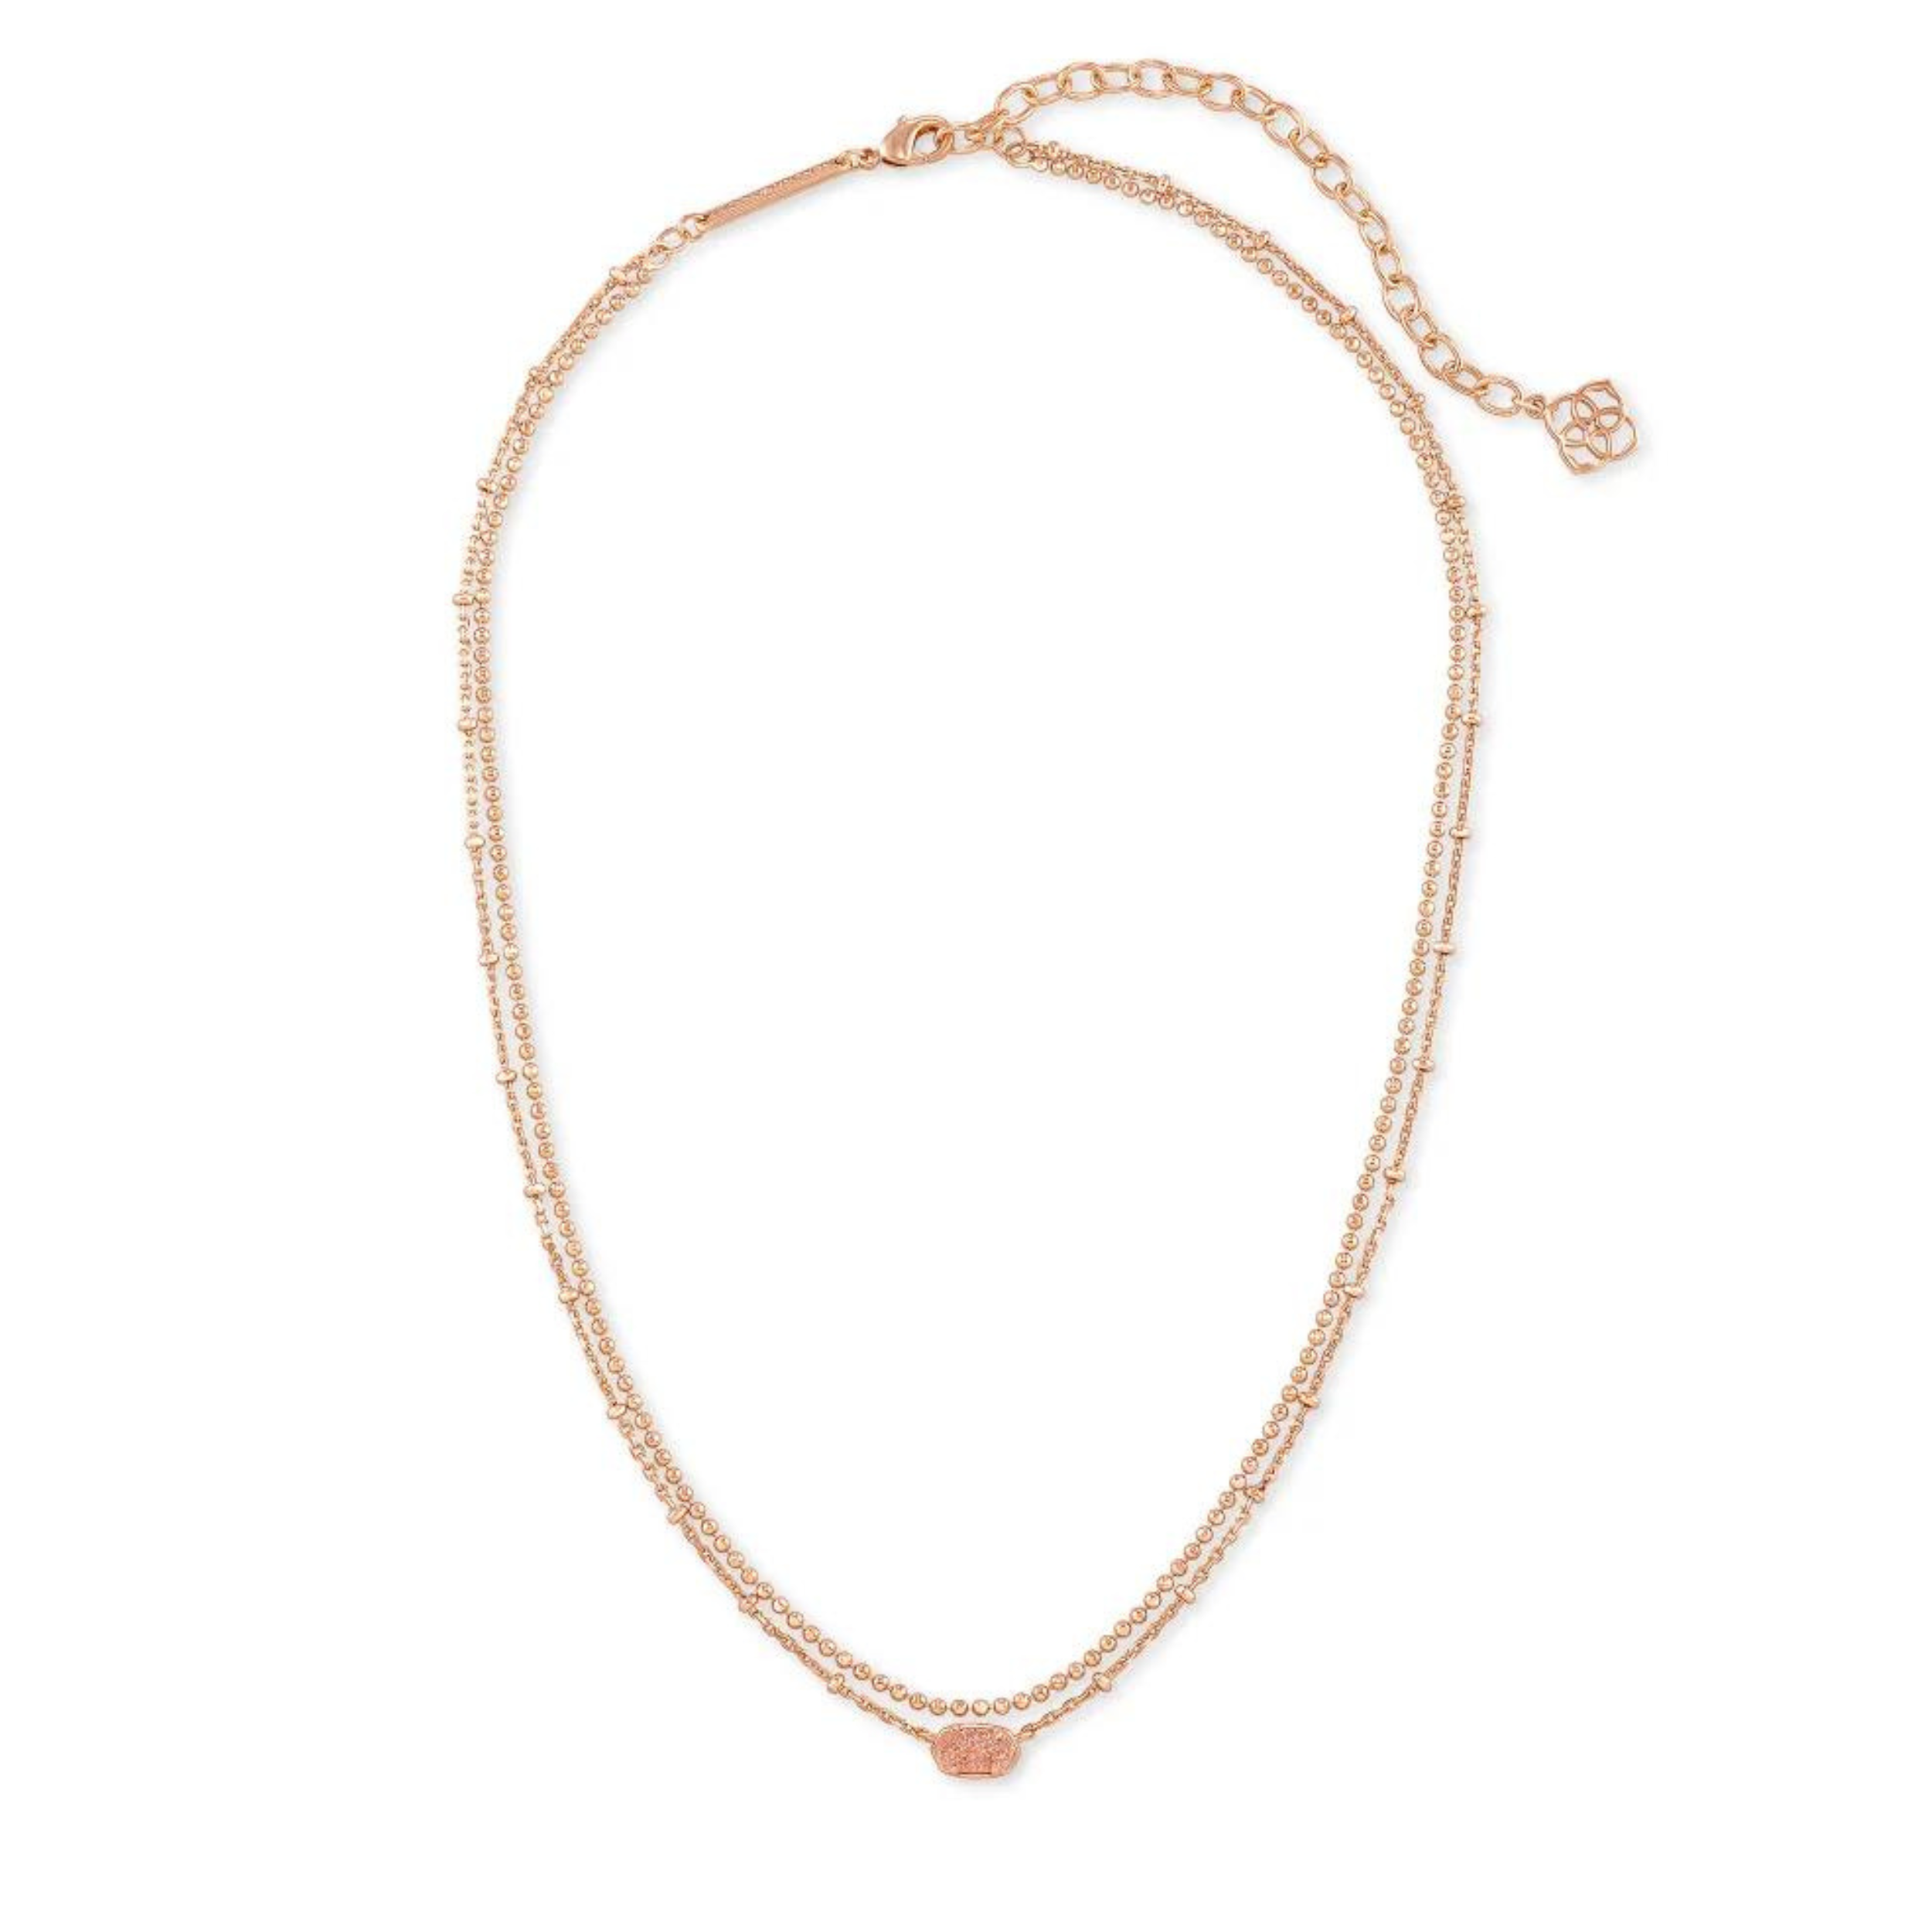 Kendra Scott | Emilie Rose Gold Multi Strand Necklace in Sand Drusy - Giddy Up Glamour Boutique